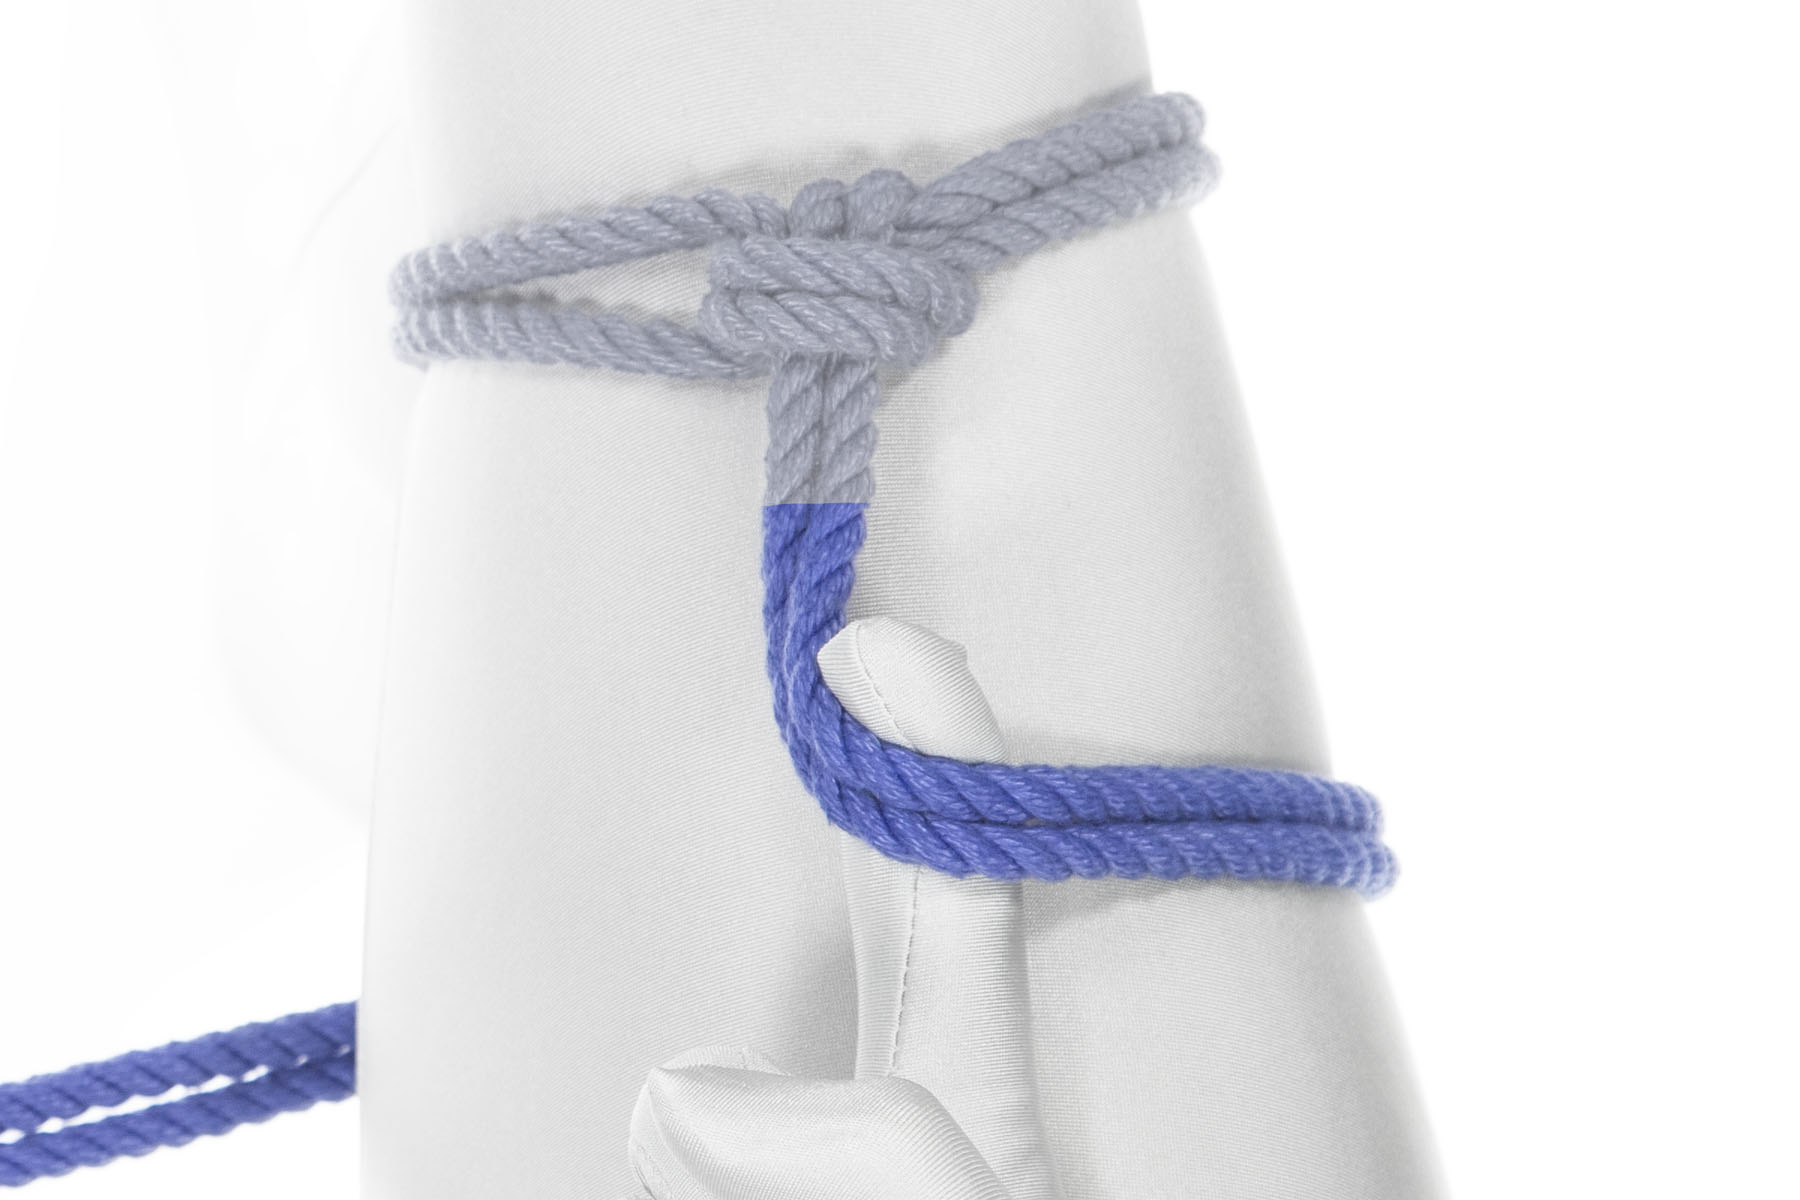 A blue rope has been tied around a thigh in a single column tie with a single wrap. The rope comes toward the body for three inches, then turns to the right and goes clockwise around the thigh. The rigger’s right index finger hooks under the rope at the turn, keeping it at 90 degrees.